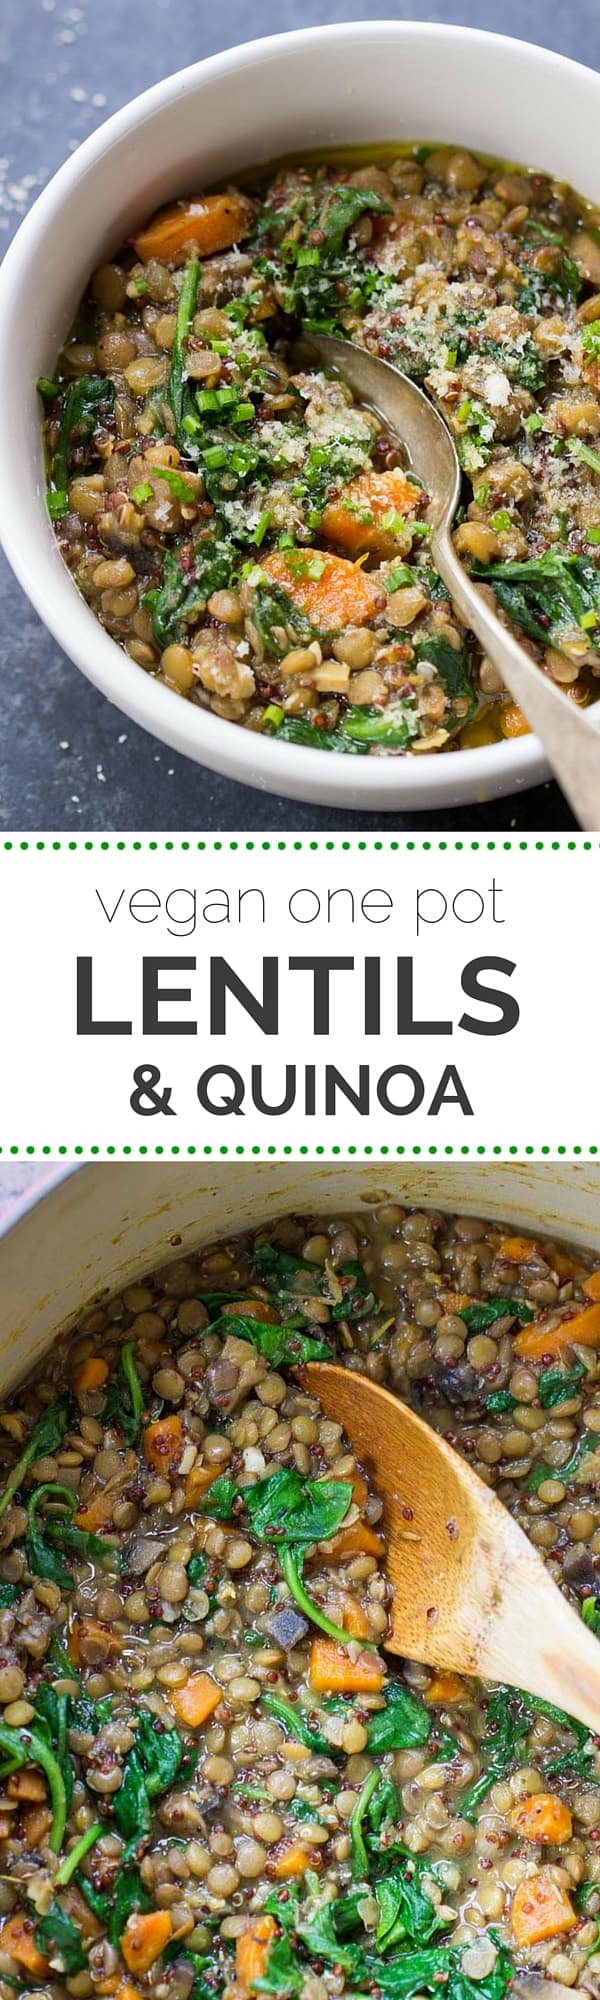 This ONE POT lentil + quinoa dish is the perfect weeknight meal - packed with nutrients + easy clean up! | recipe on simplyquinoa.com